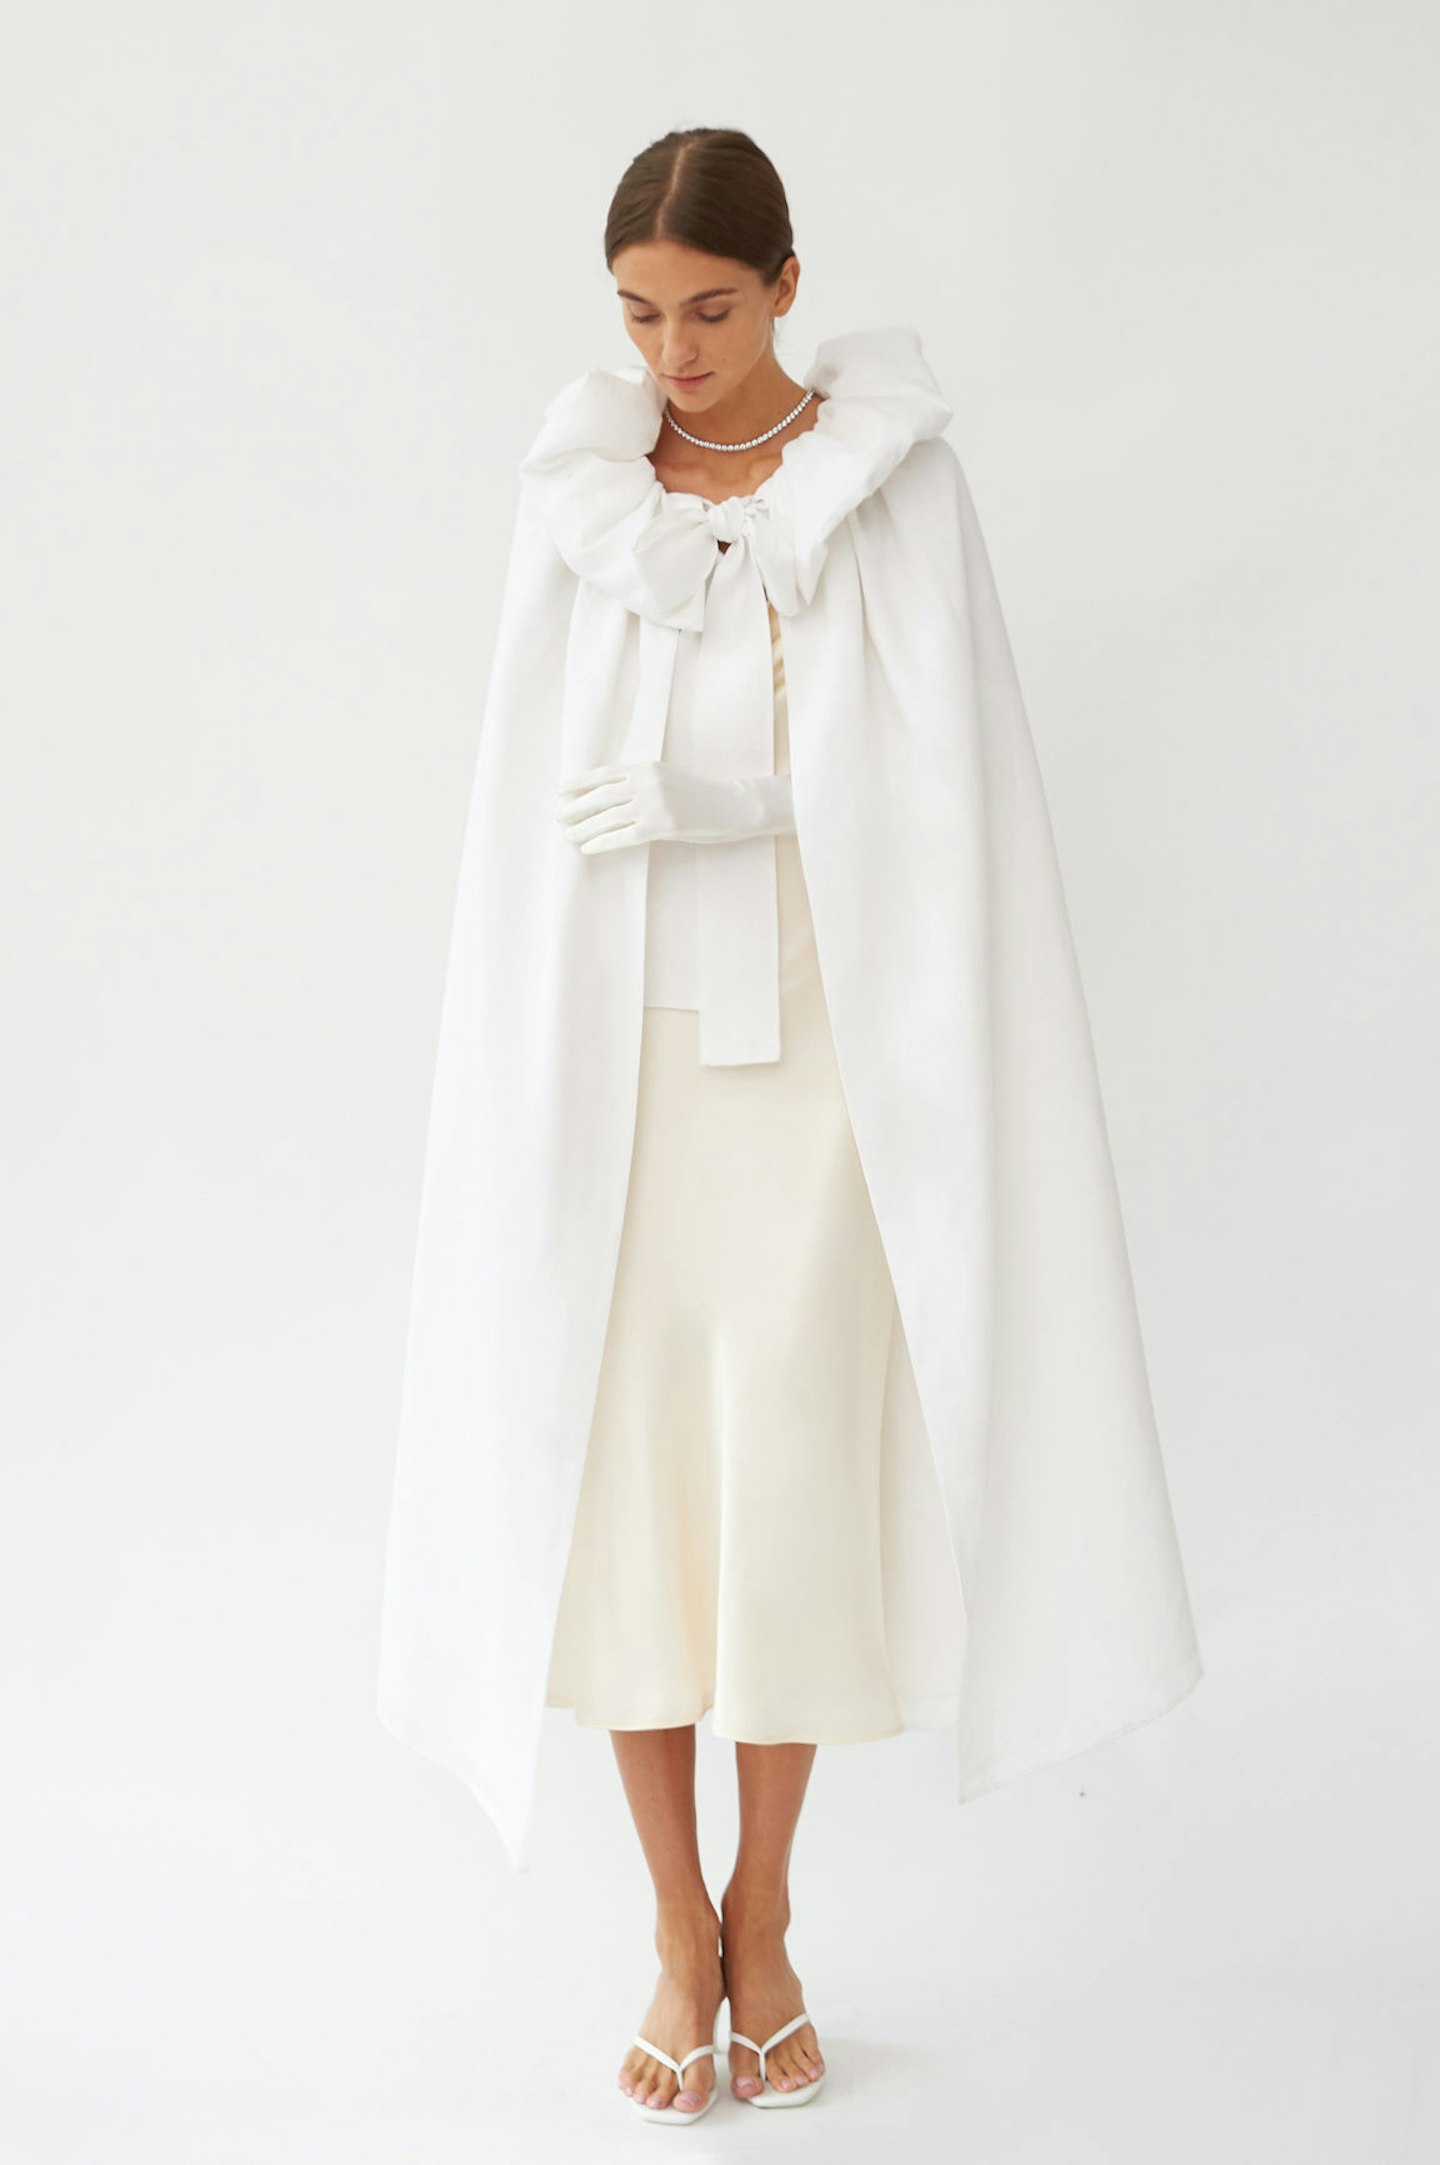 Whitewing Linen Cape, £223